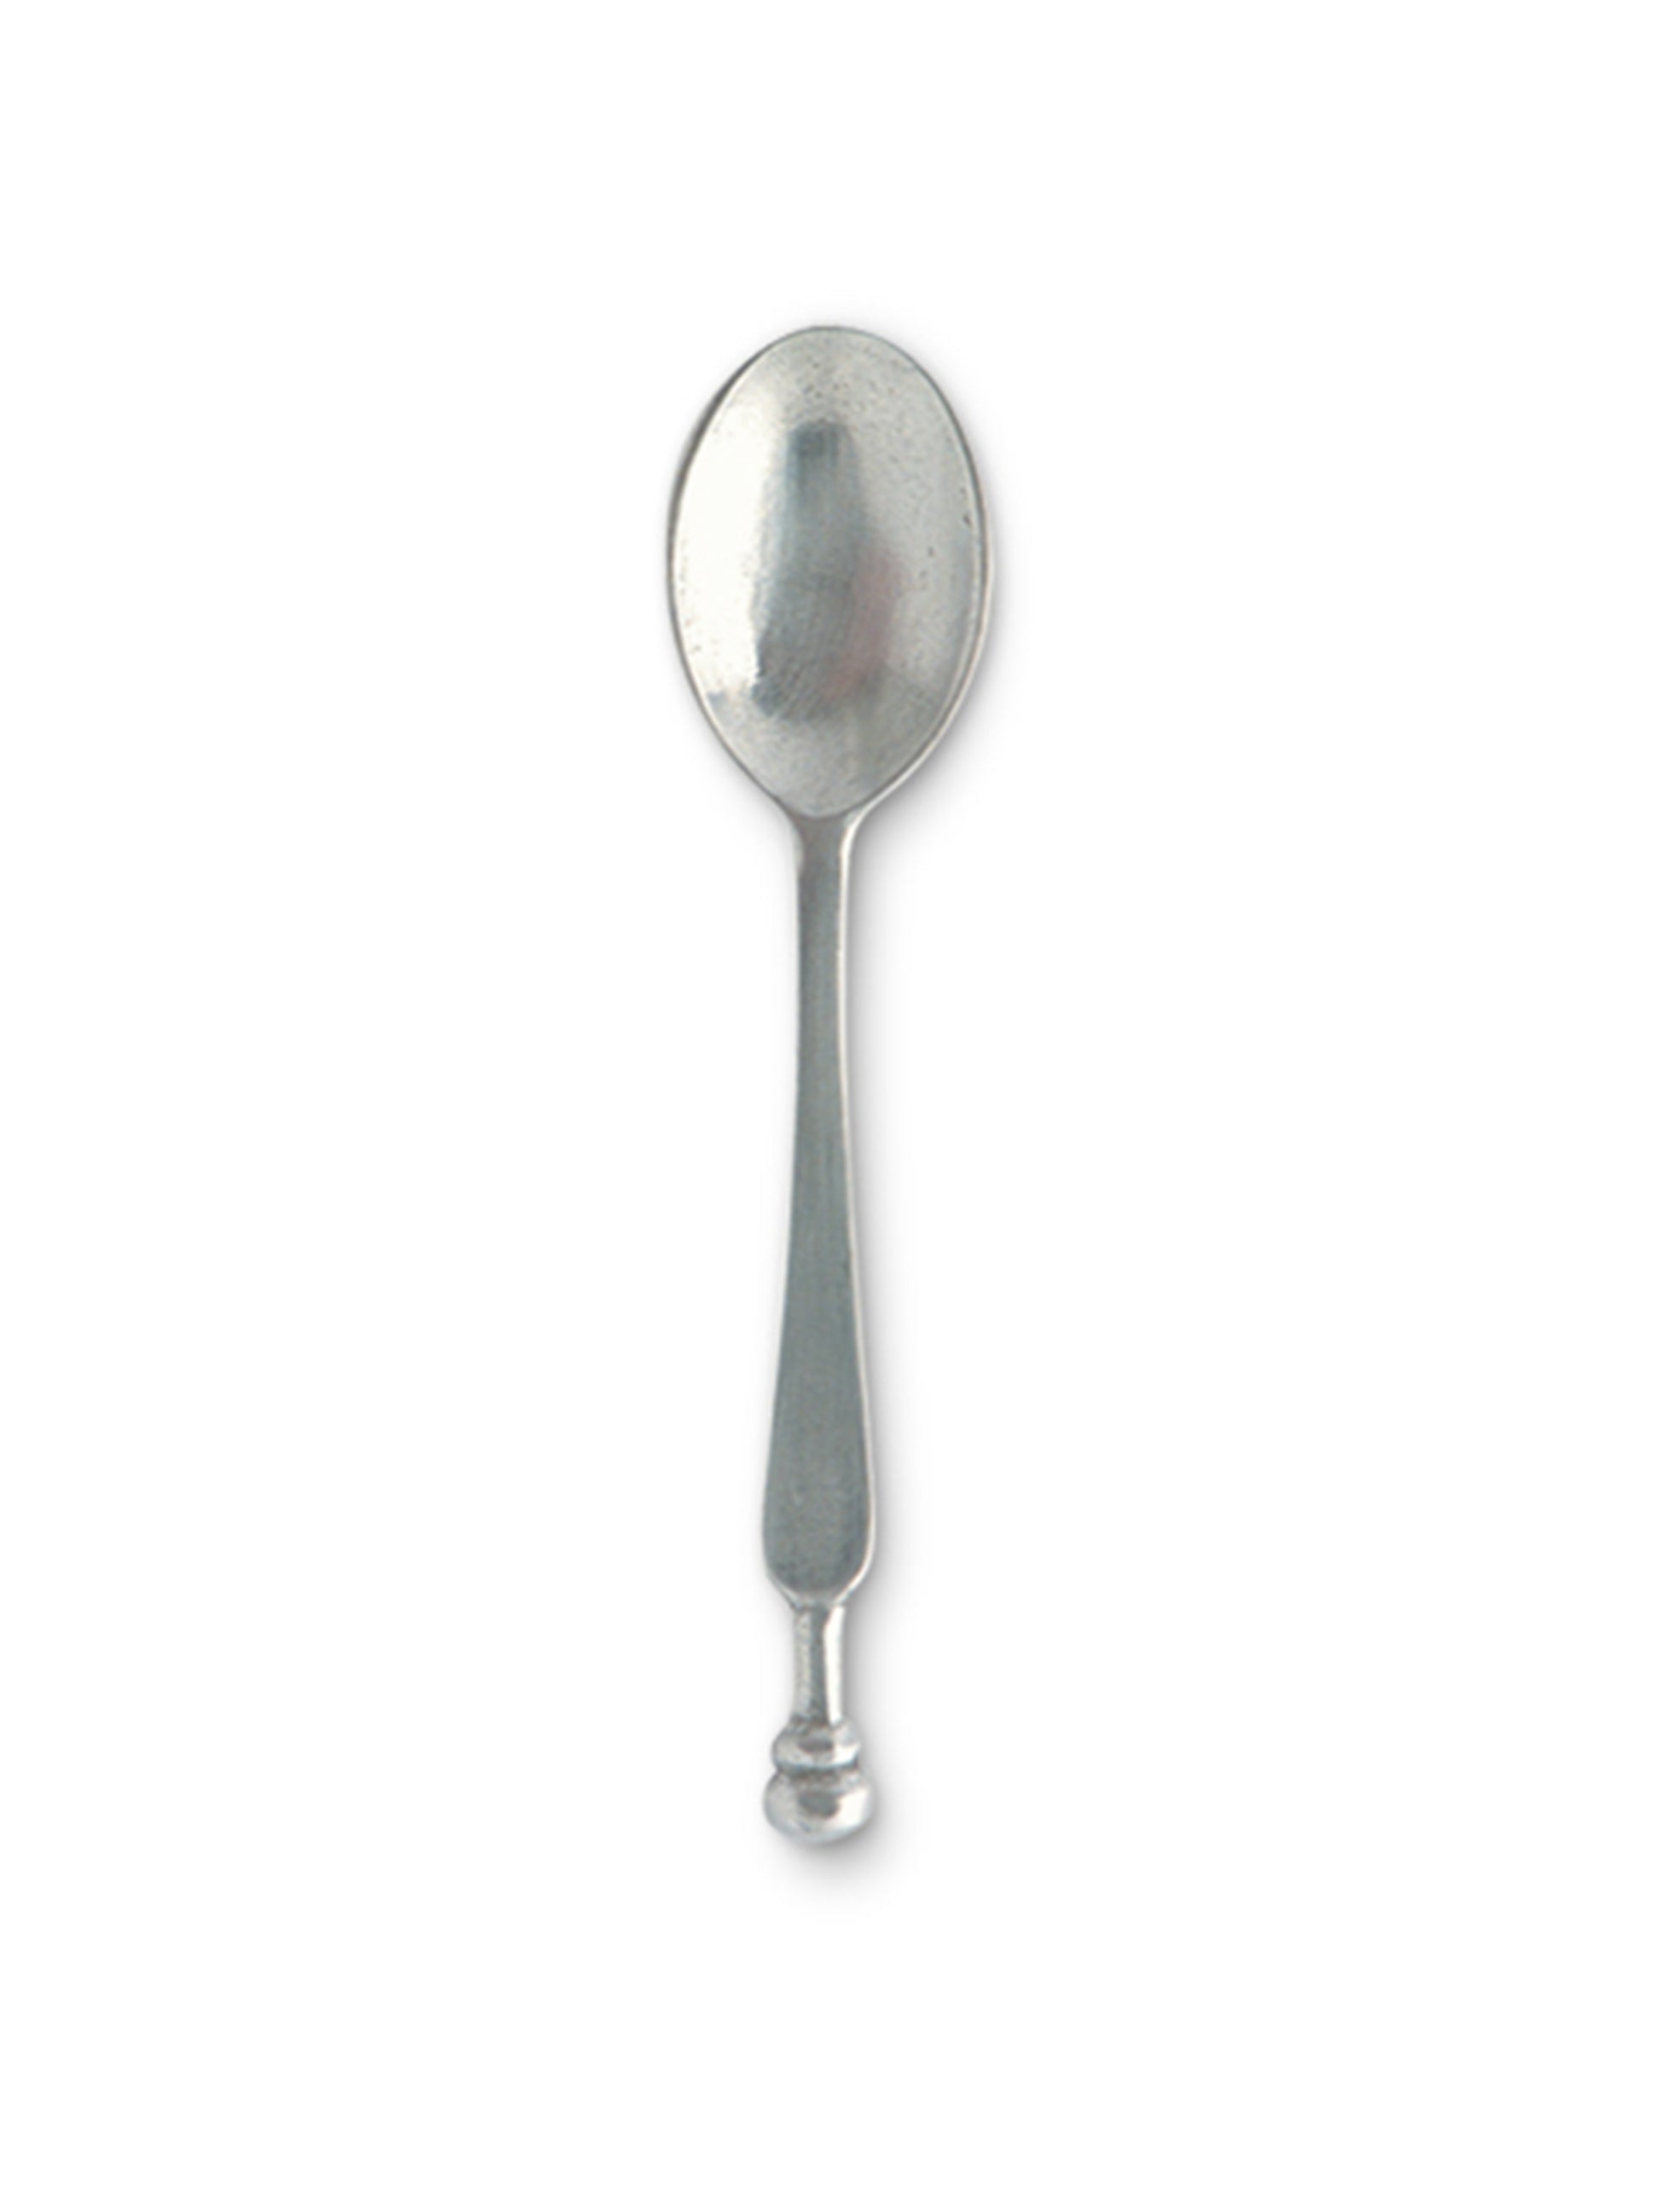 MATCH Pewter Taper Ball Spoon Weston Table